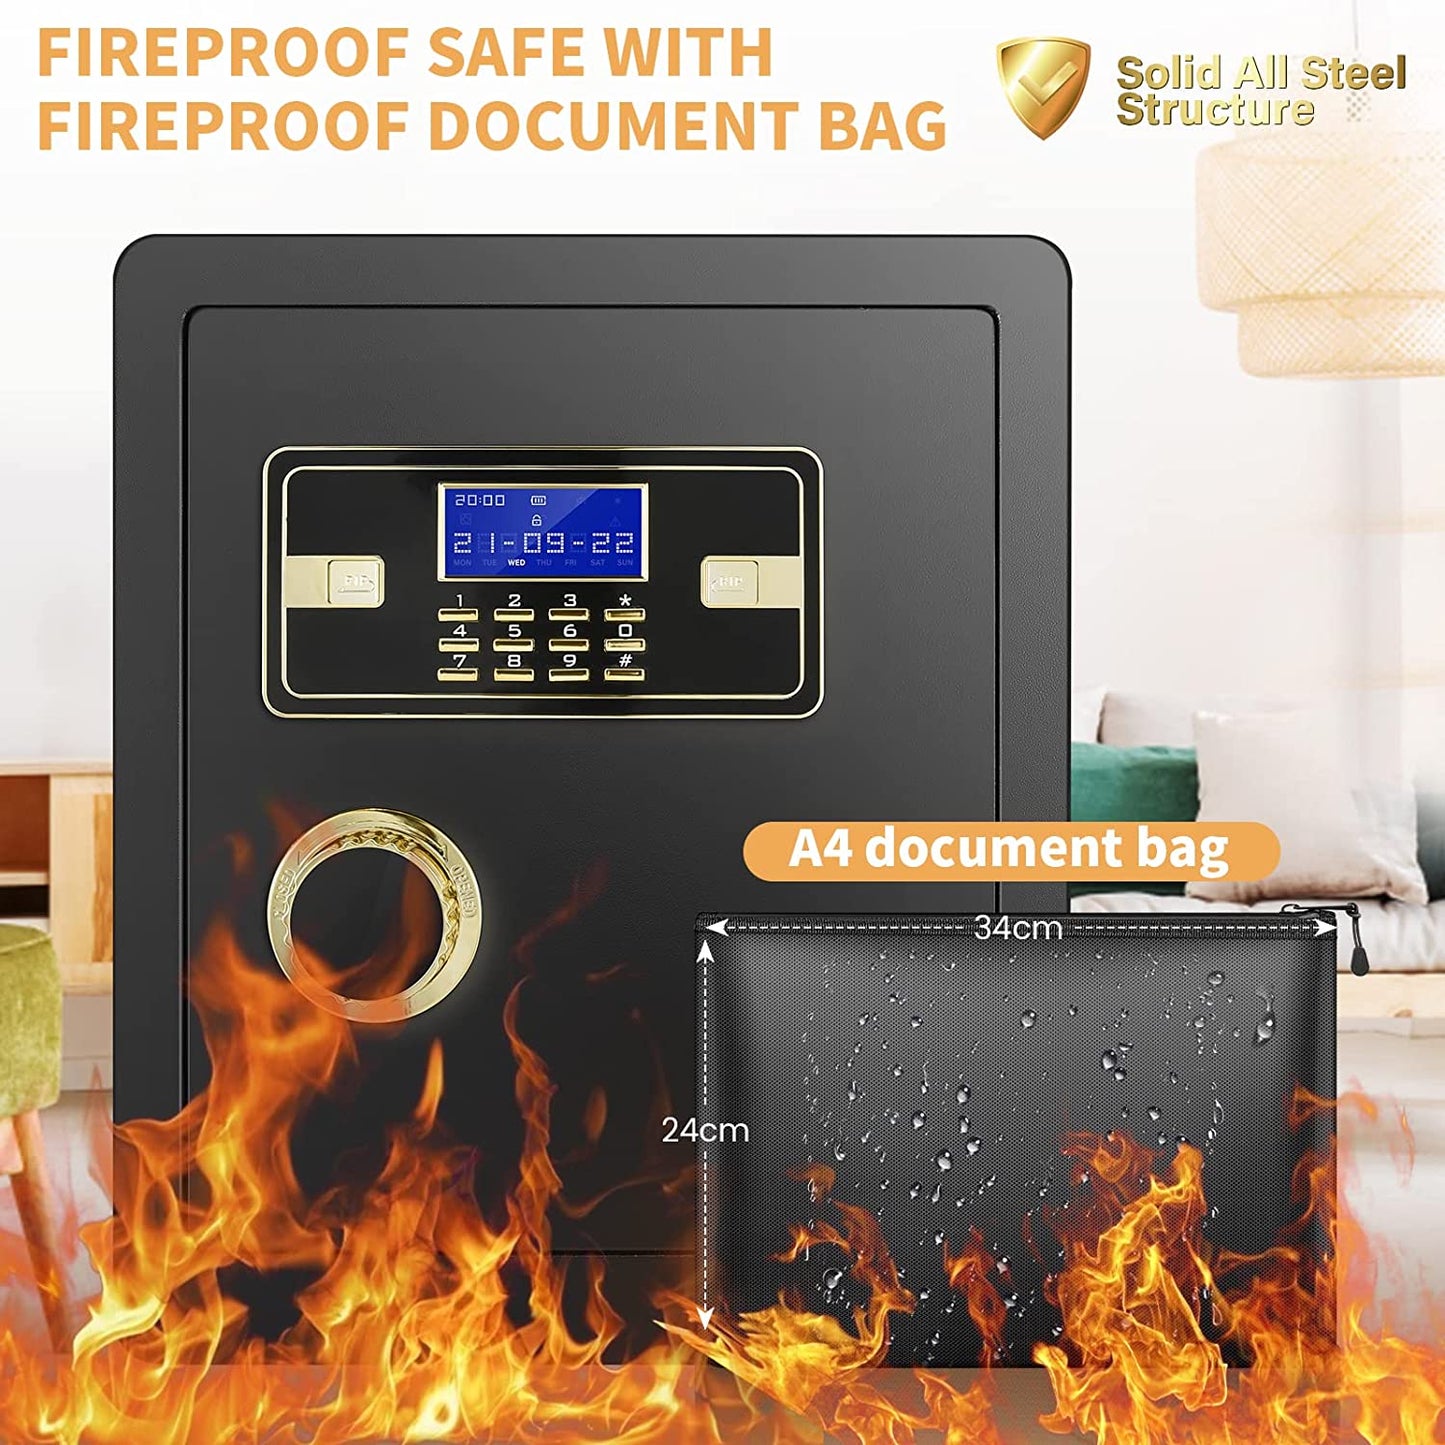 2.12 Cub Safe Box Fireproof Waterproof, Security Home Safe with Fireproof Document Bag, Large Fireproof Safe Box for Home with Inner Cabinet and LCD Display, Safe Box for Money Jewelry Documents